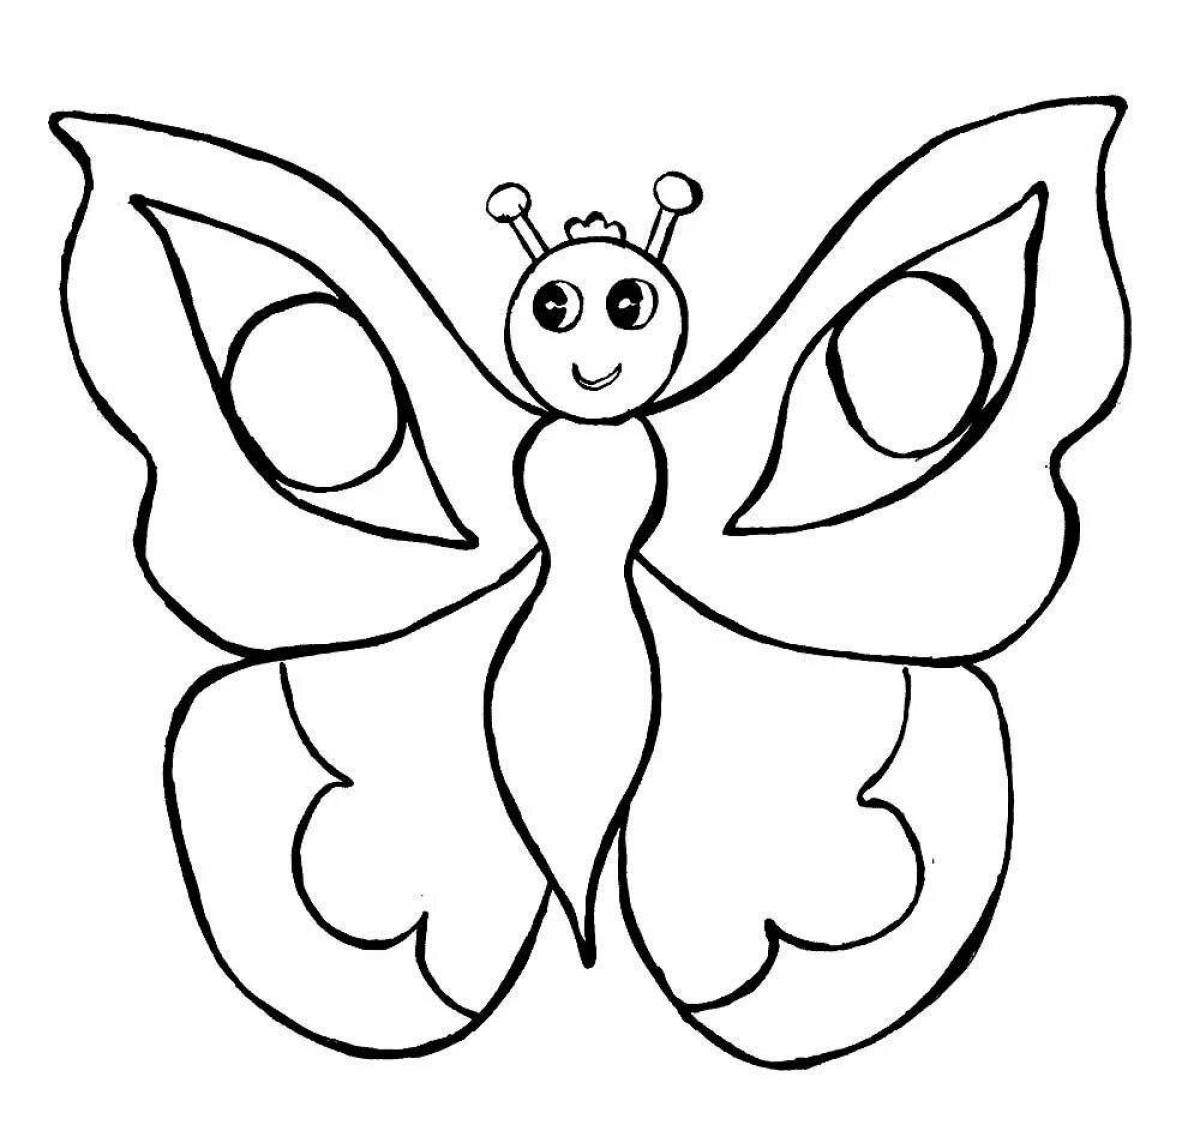 Playful children's butterfly coloring book